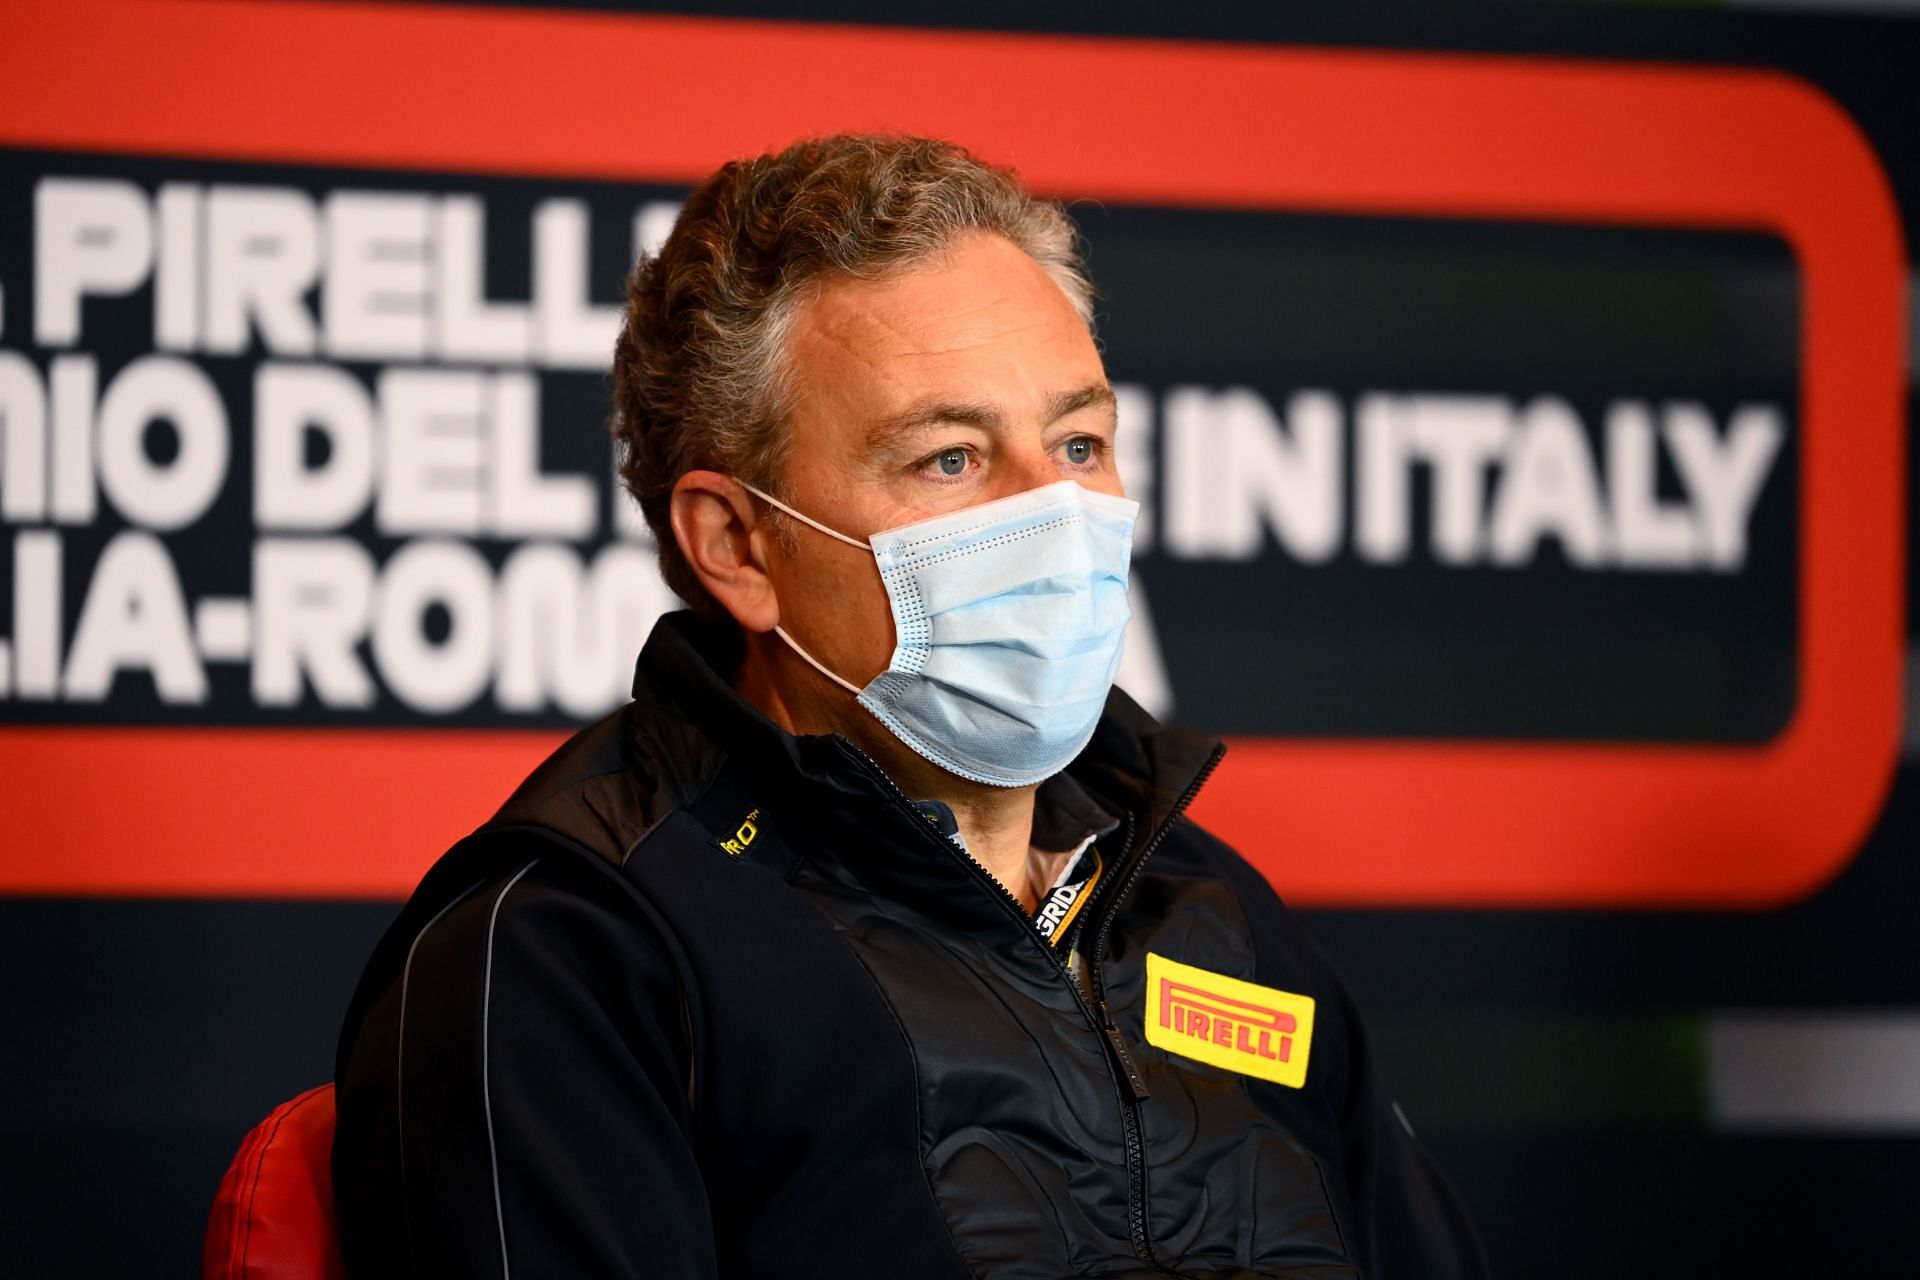 Pirelli F1 boss Mario Isola during the 2021 Imola GP (Photo by Clive Mason/Getty Images)